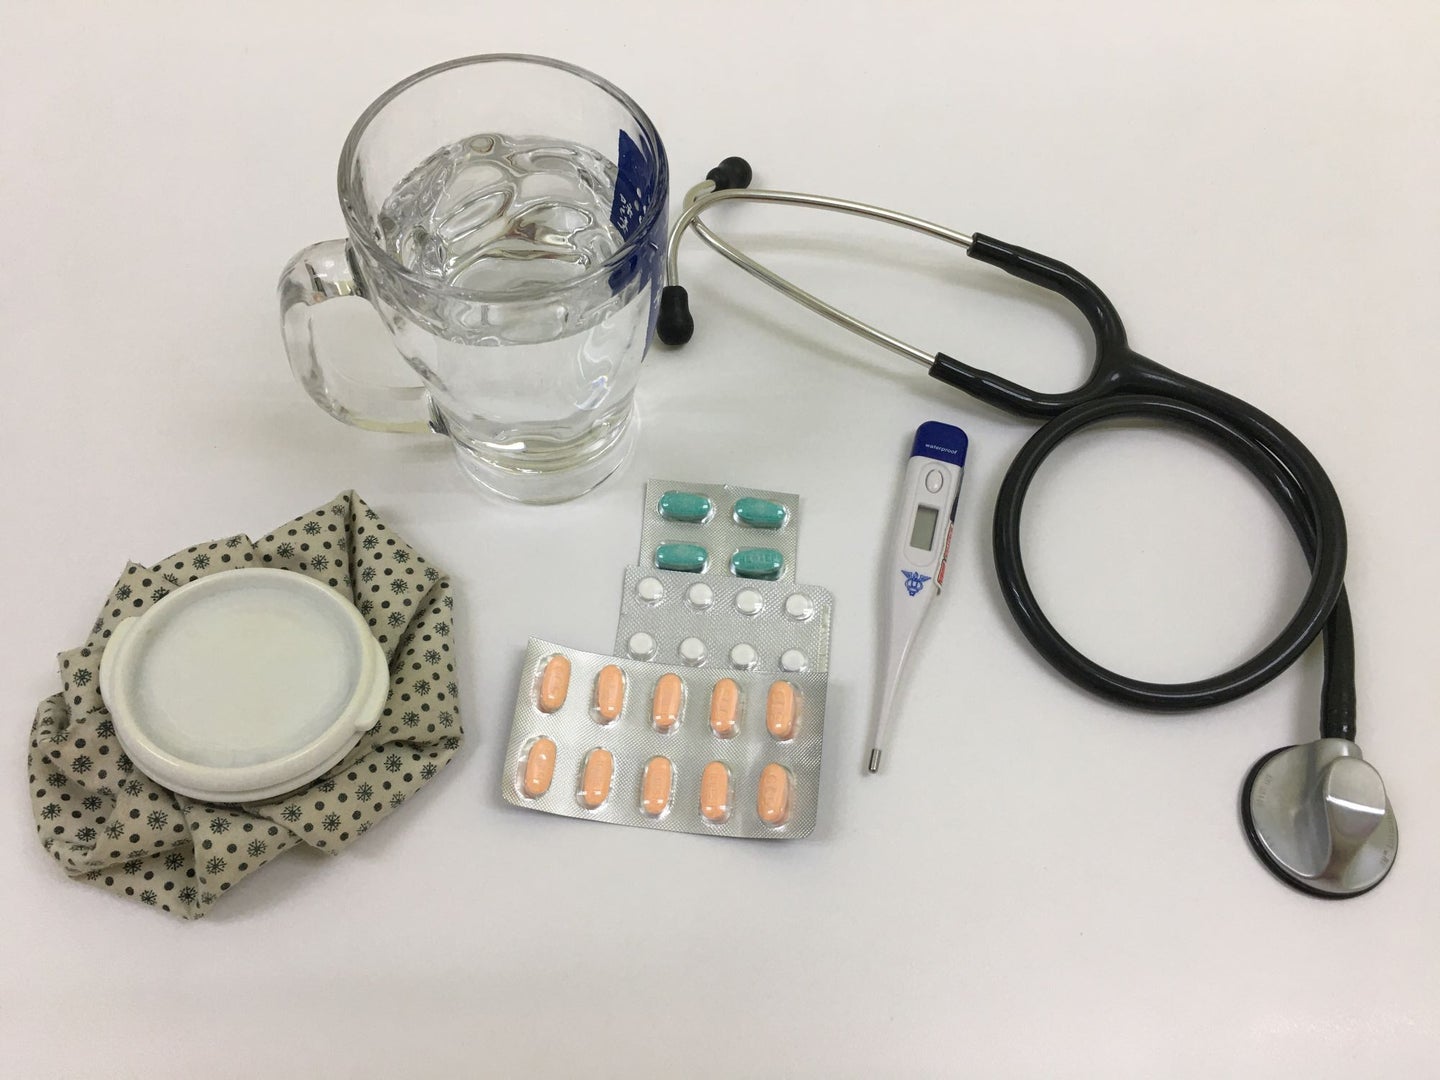 A collection of items used to ease flu symptoms: a glass of water, hot water bottle, allergy pills, a thermometer and a stethoscope